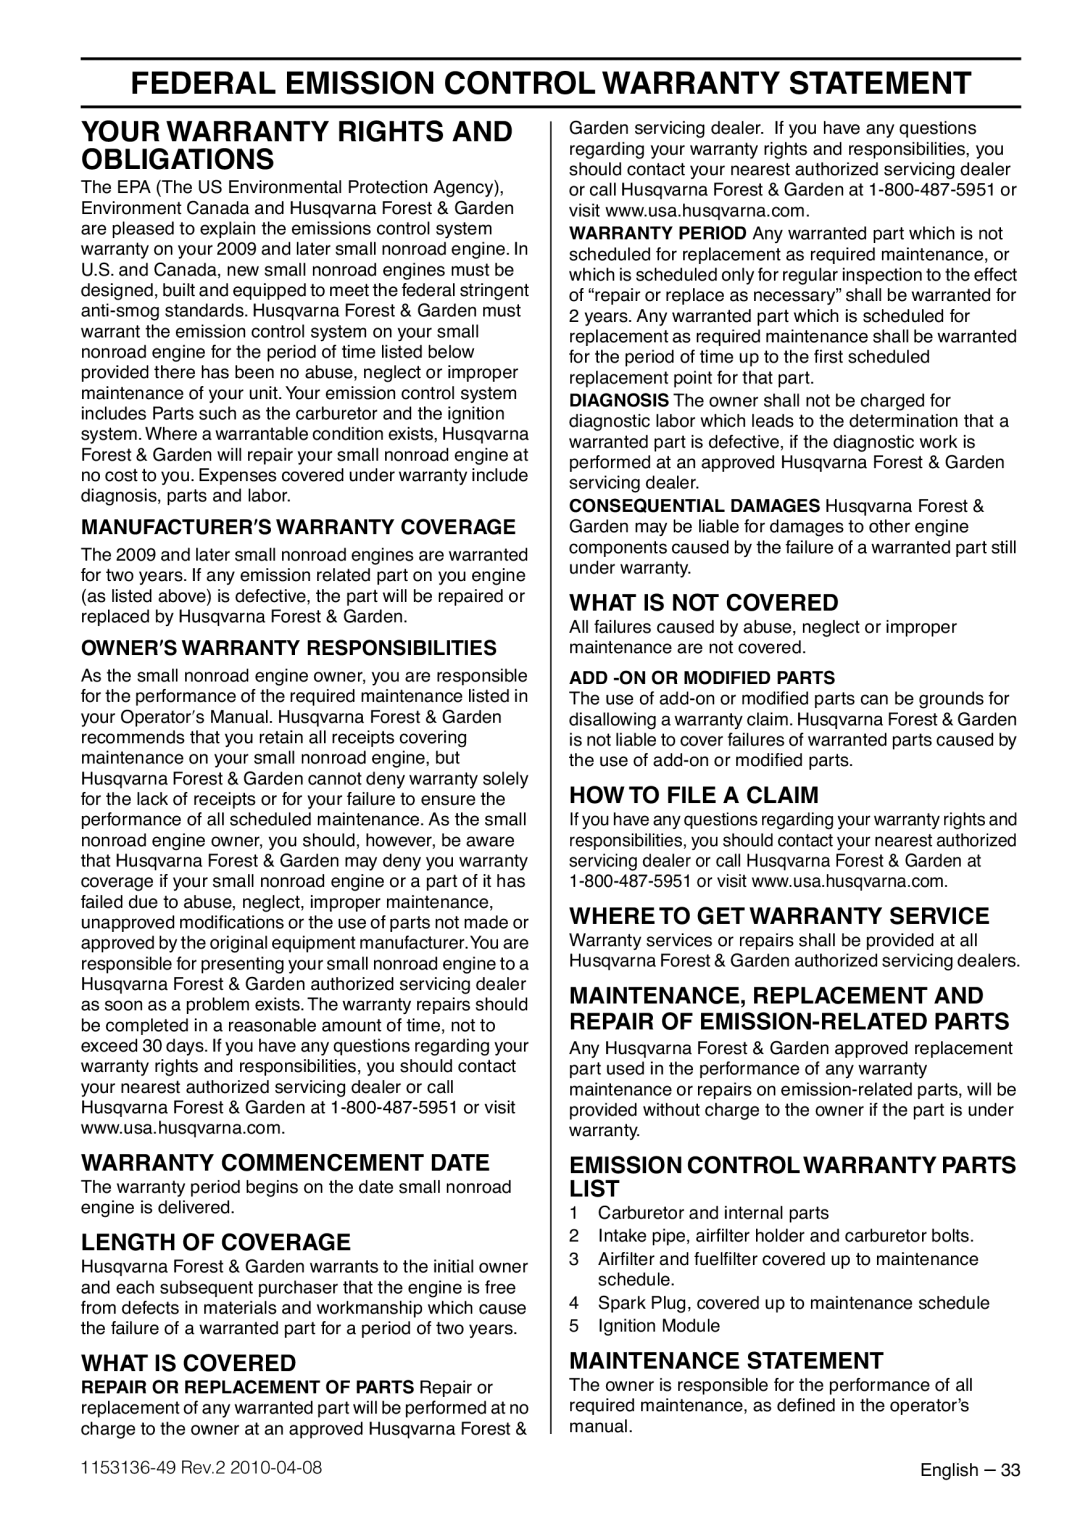 Husqvarna 1153136-49 Federal Emission Control Warranty Statement, Your Warranty Rights And Obligations, Length Of Coverage 